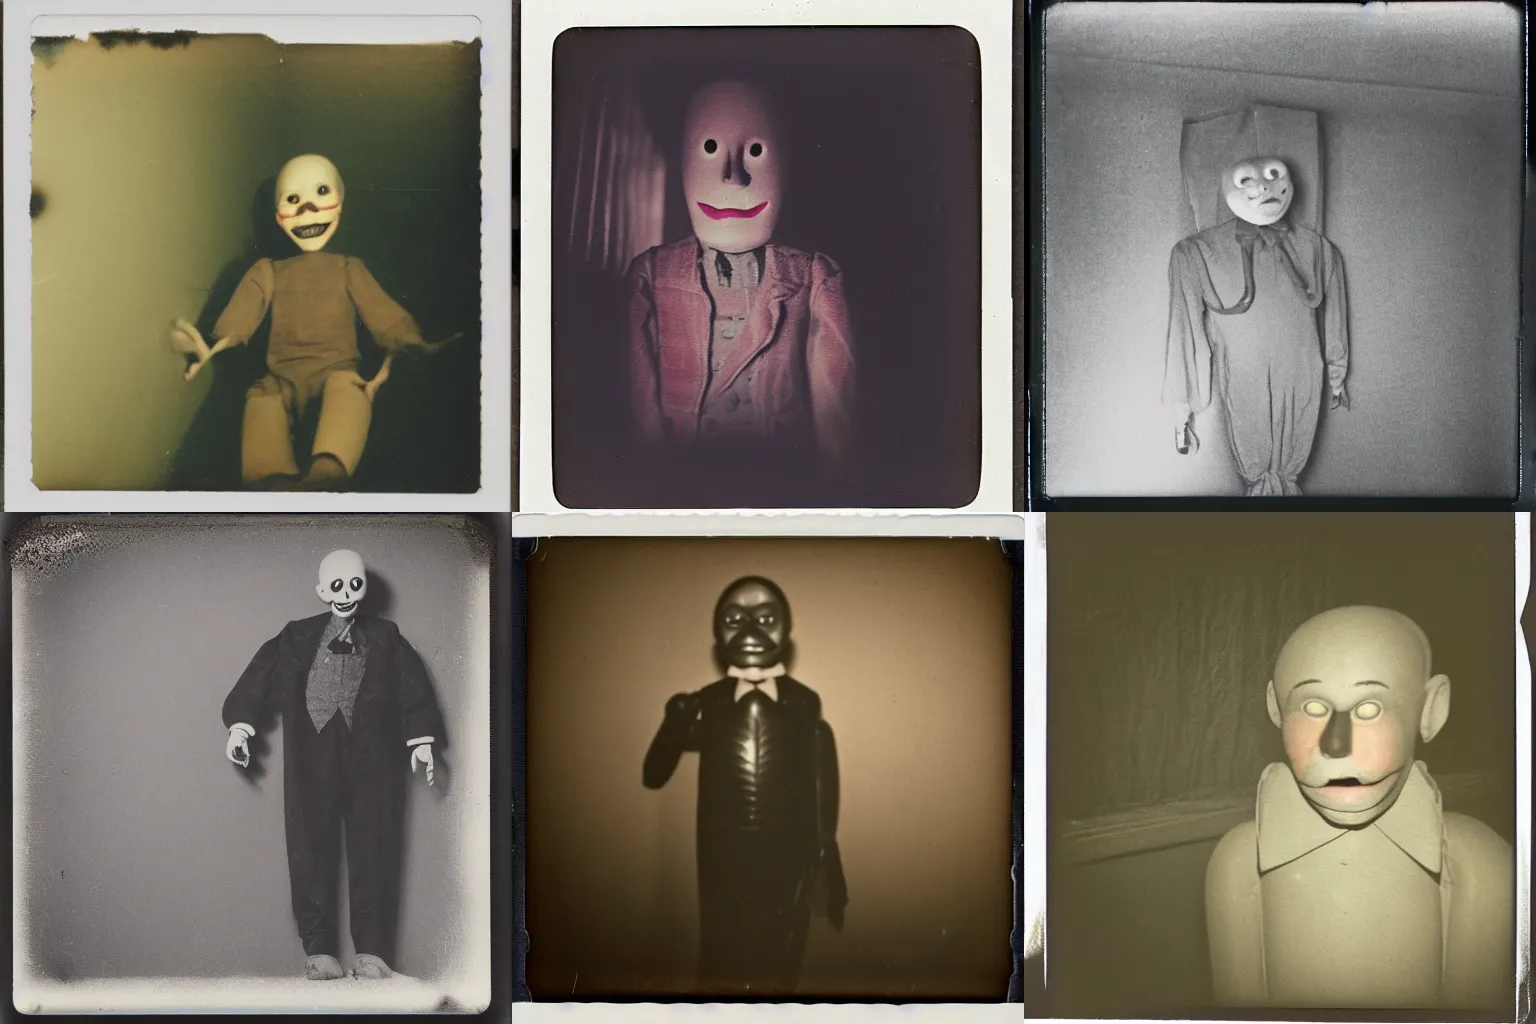 Prompt: an eerie polaroid photograph of a ventriloquist dummy inside the crawlspace, nighttime, dimly lit, creepy